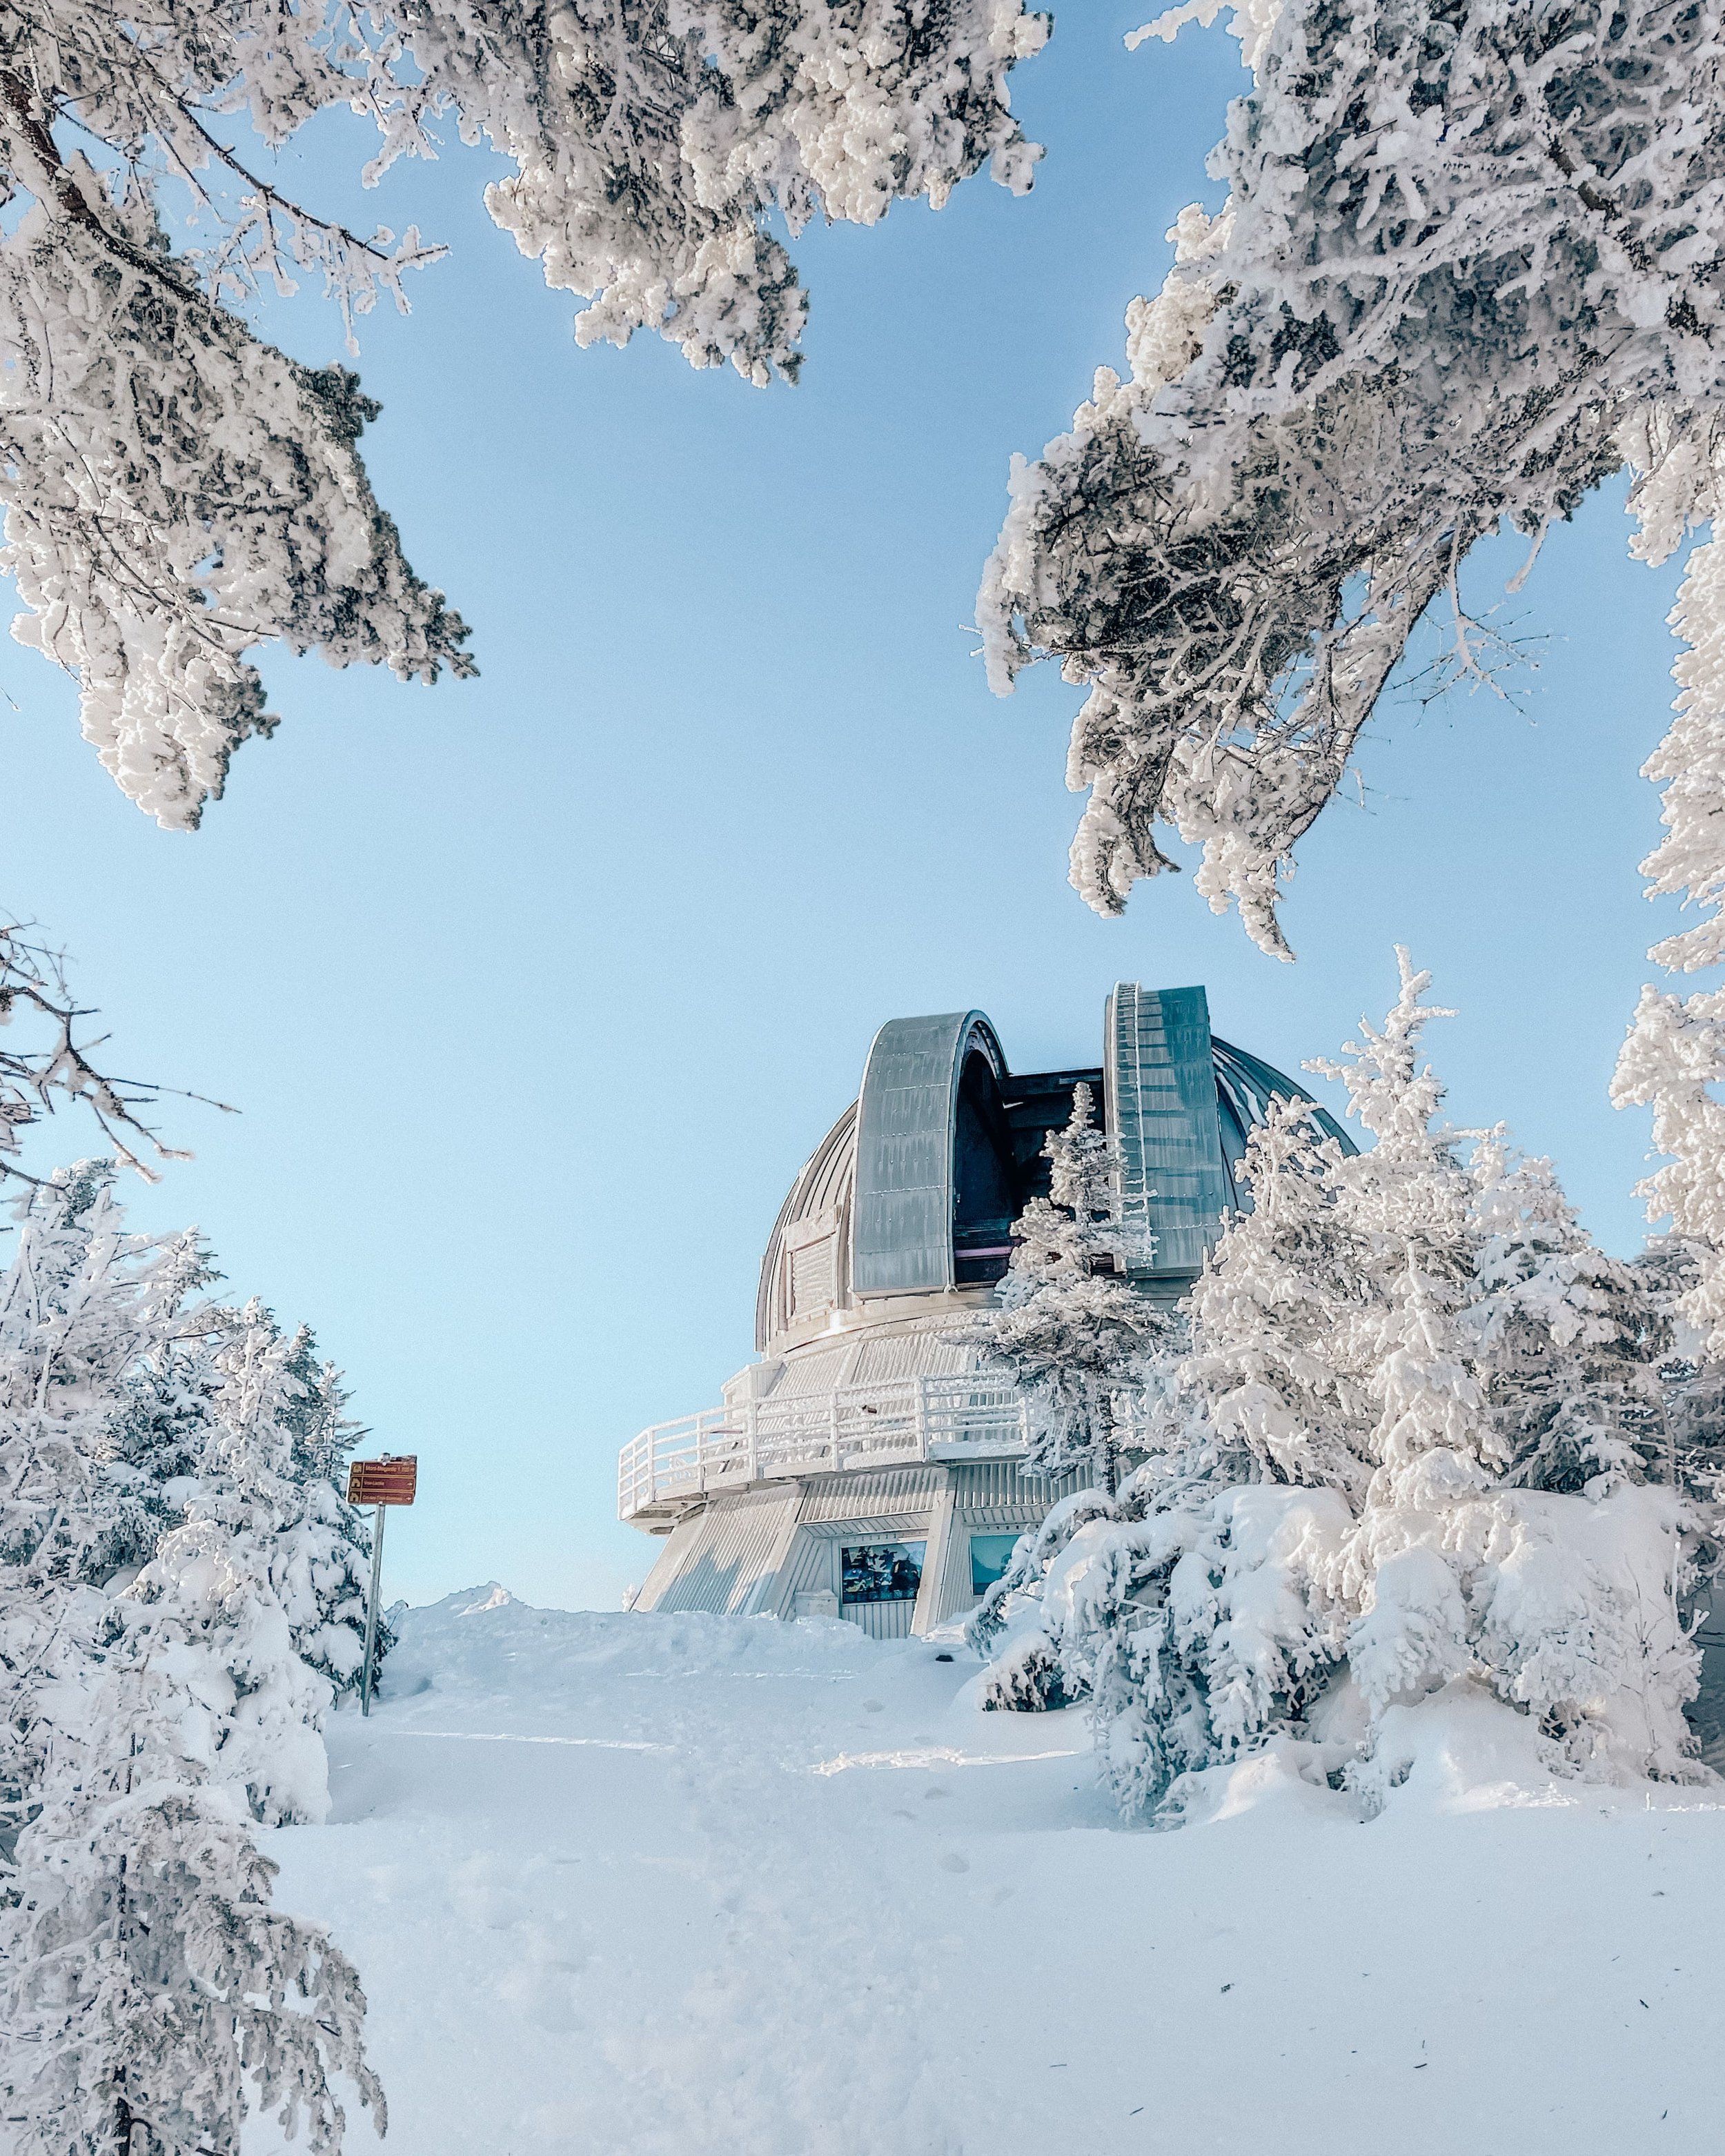 Closer view of the observatory - Mount Megantic - Eastern Townships - Quebec - Canada